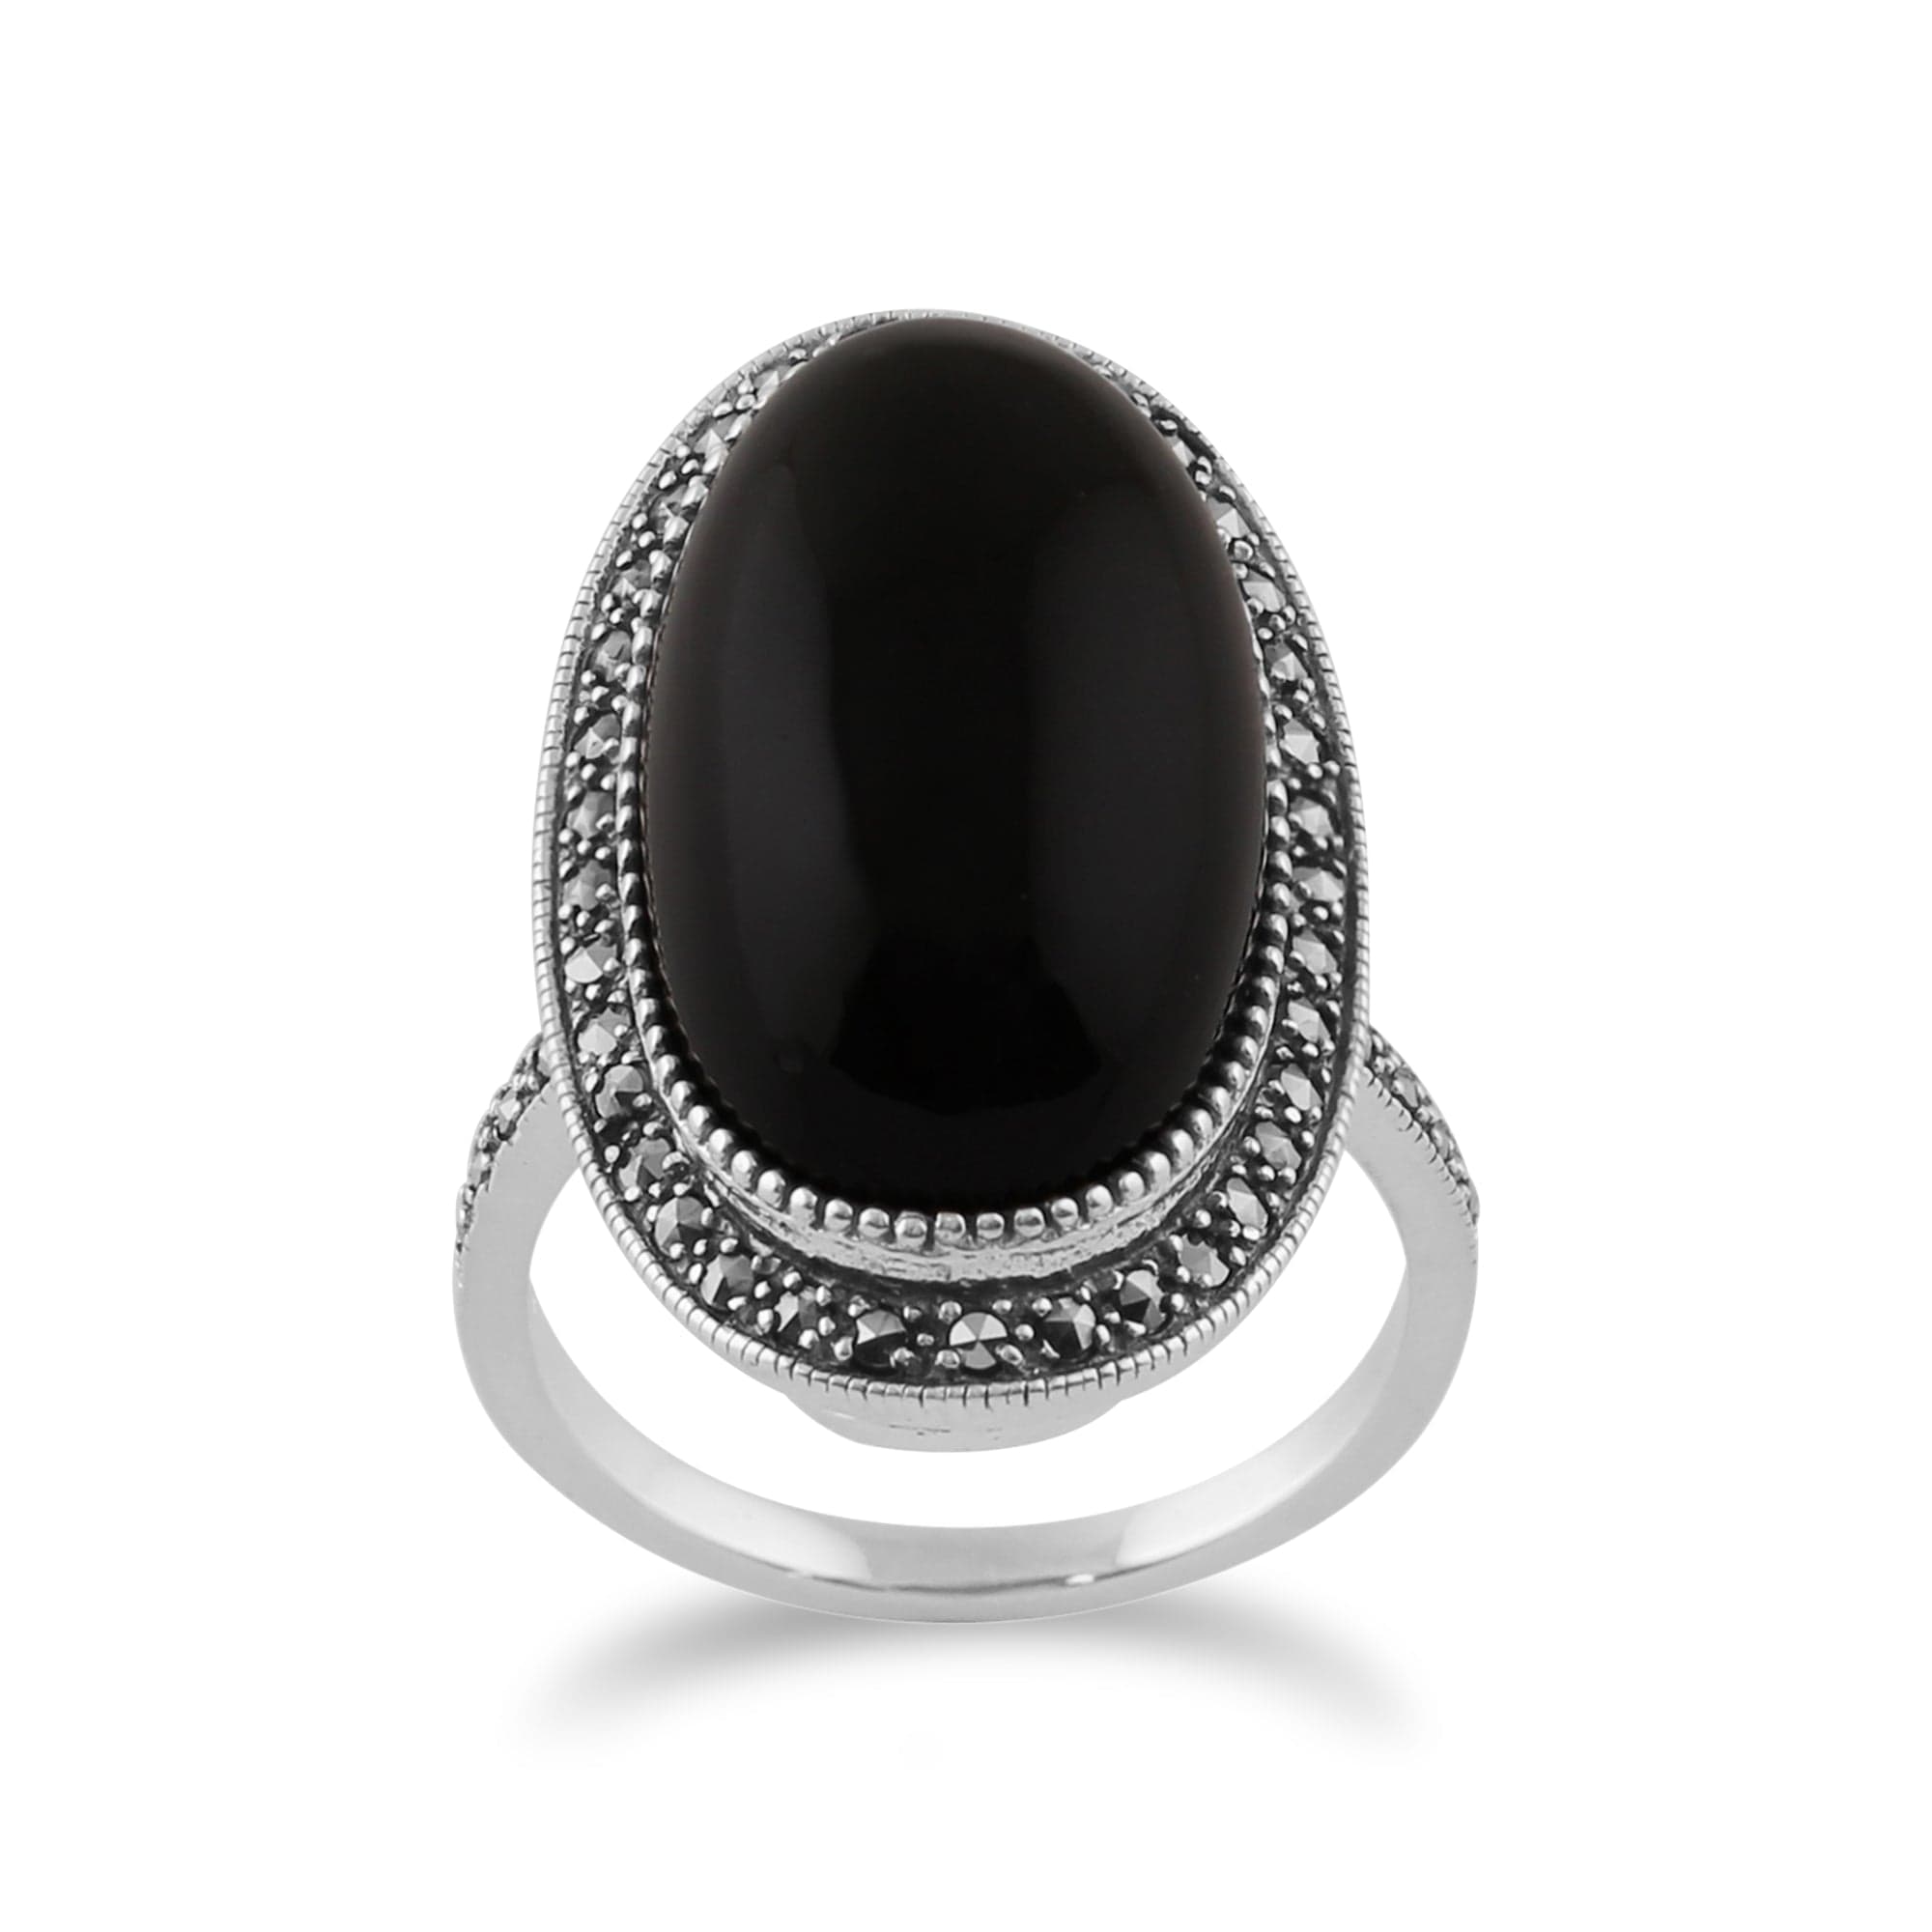 Image of Art Deco Style Black Onyx Cabochon & Marcasite Cocktail Ring